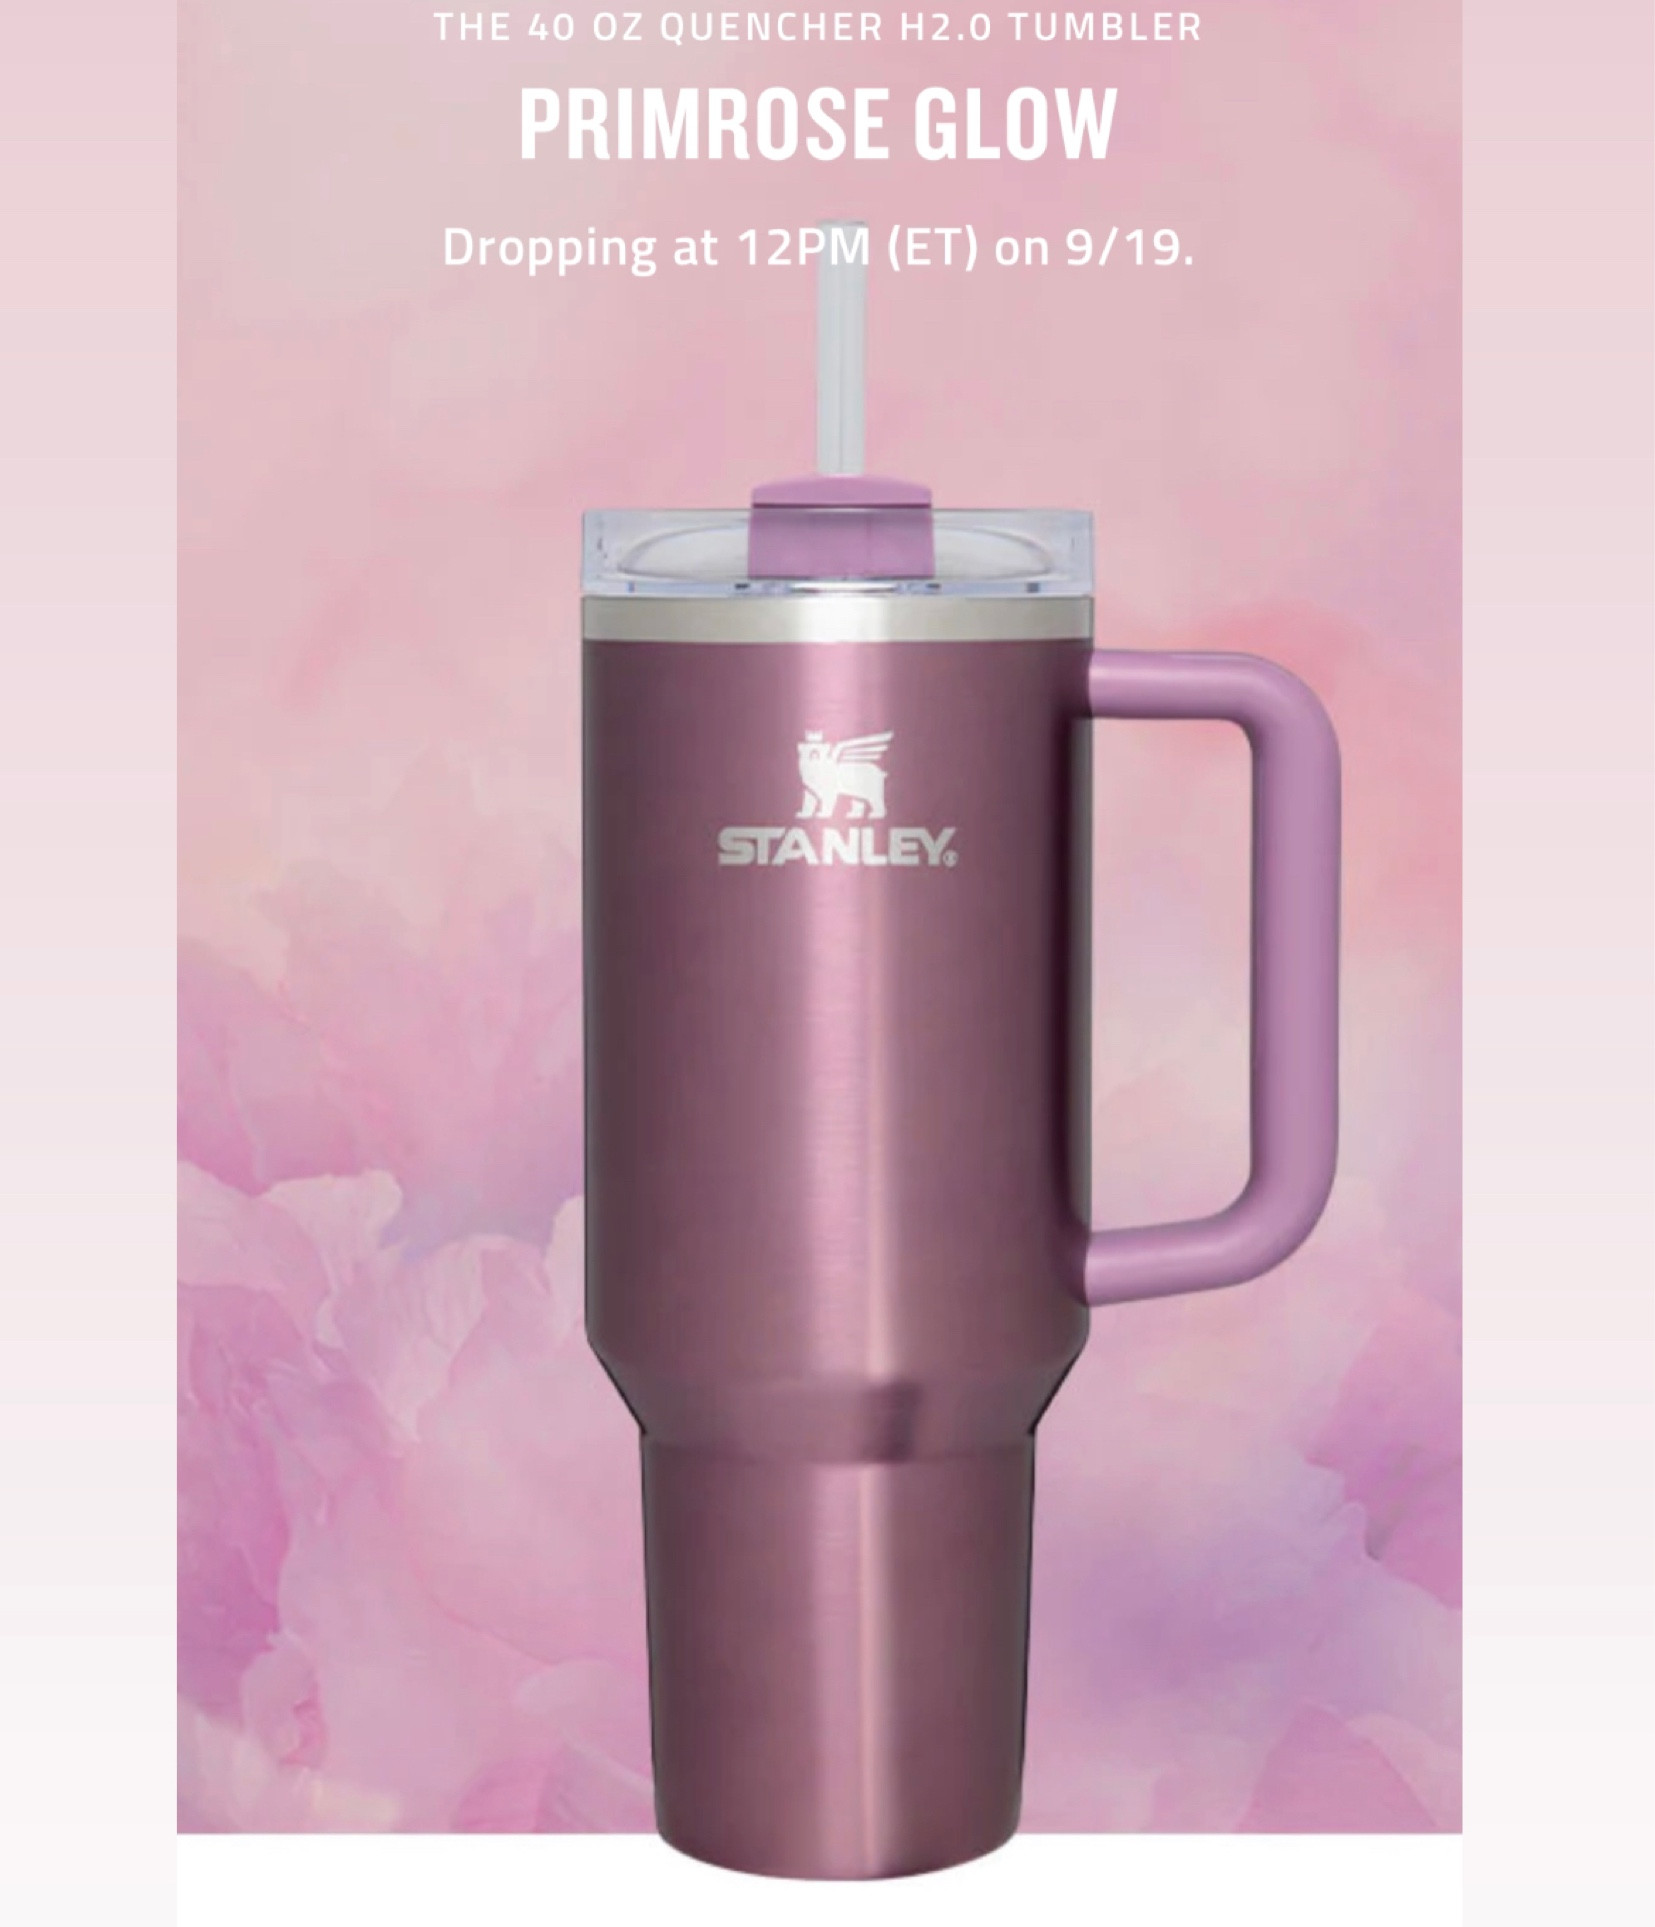 Stanley The Quencher H2.0 FlowState™ Tumbler Limited Edition Color | 40 OZ  - Primrose Glow